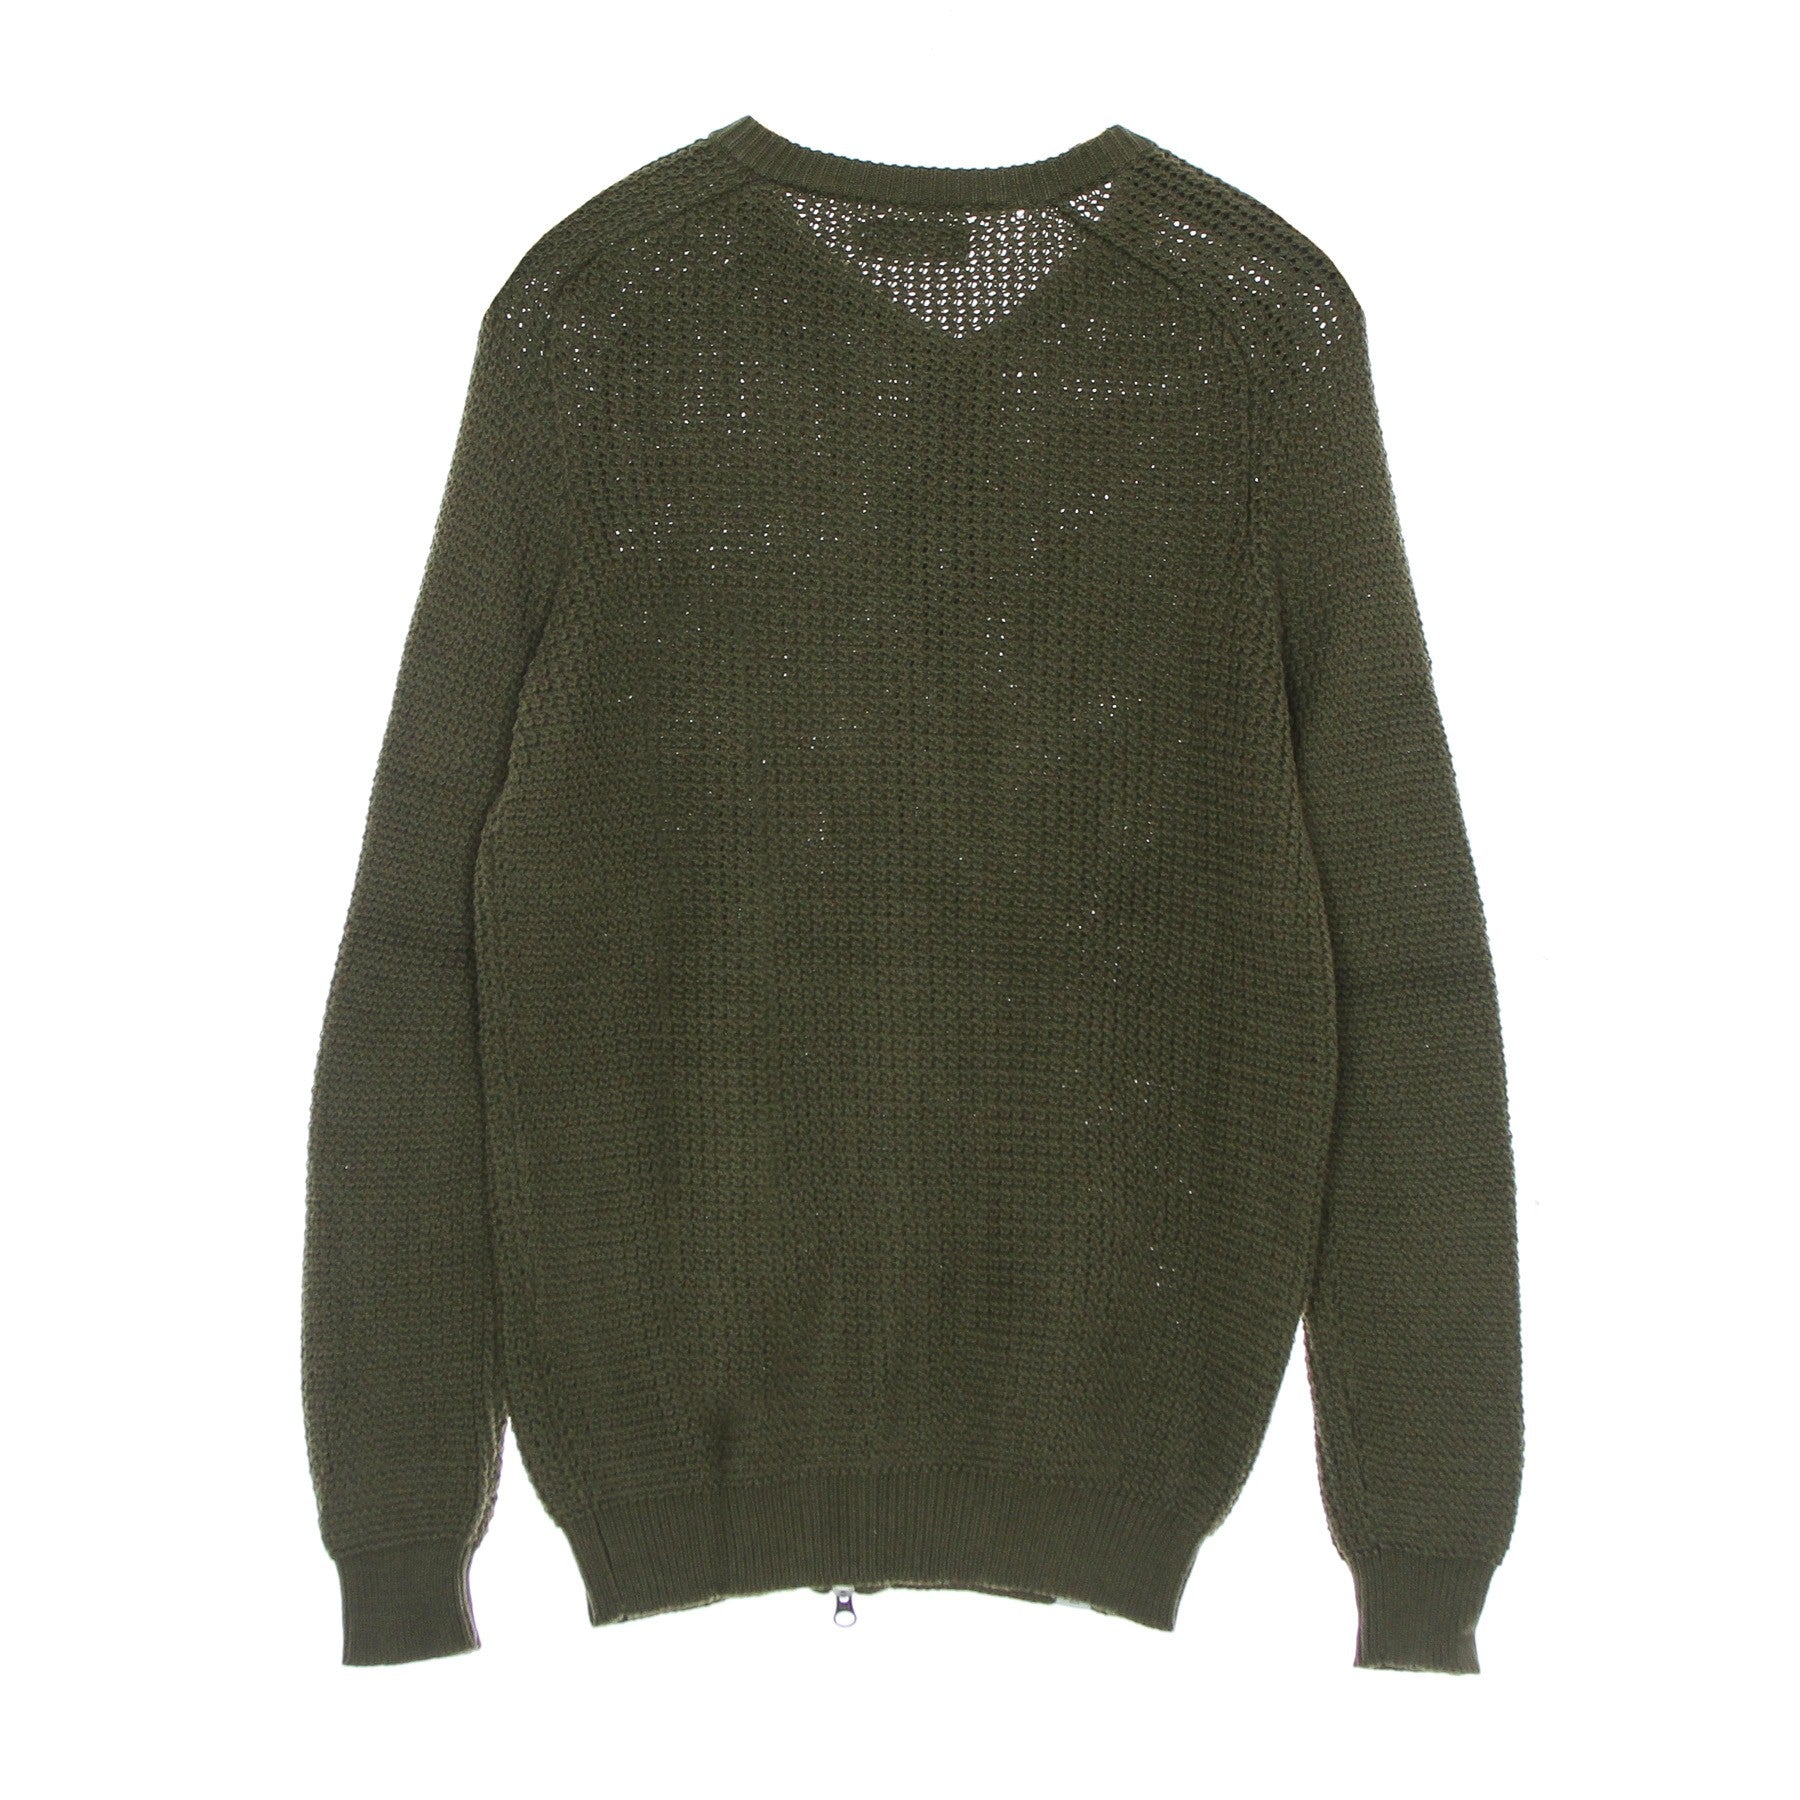 Reell, Maglione Uomo Knitted Zip Crewneck, 